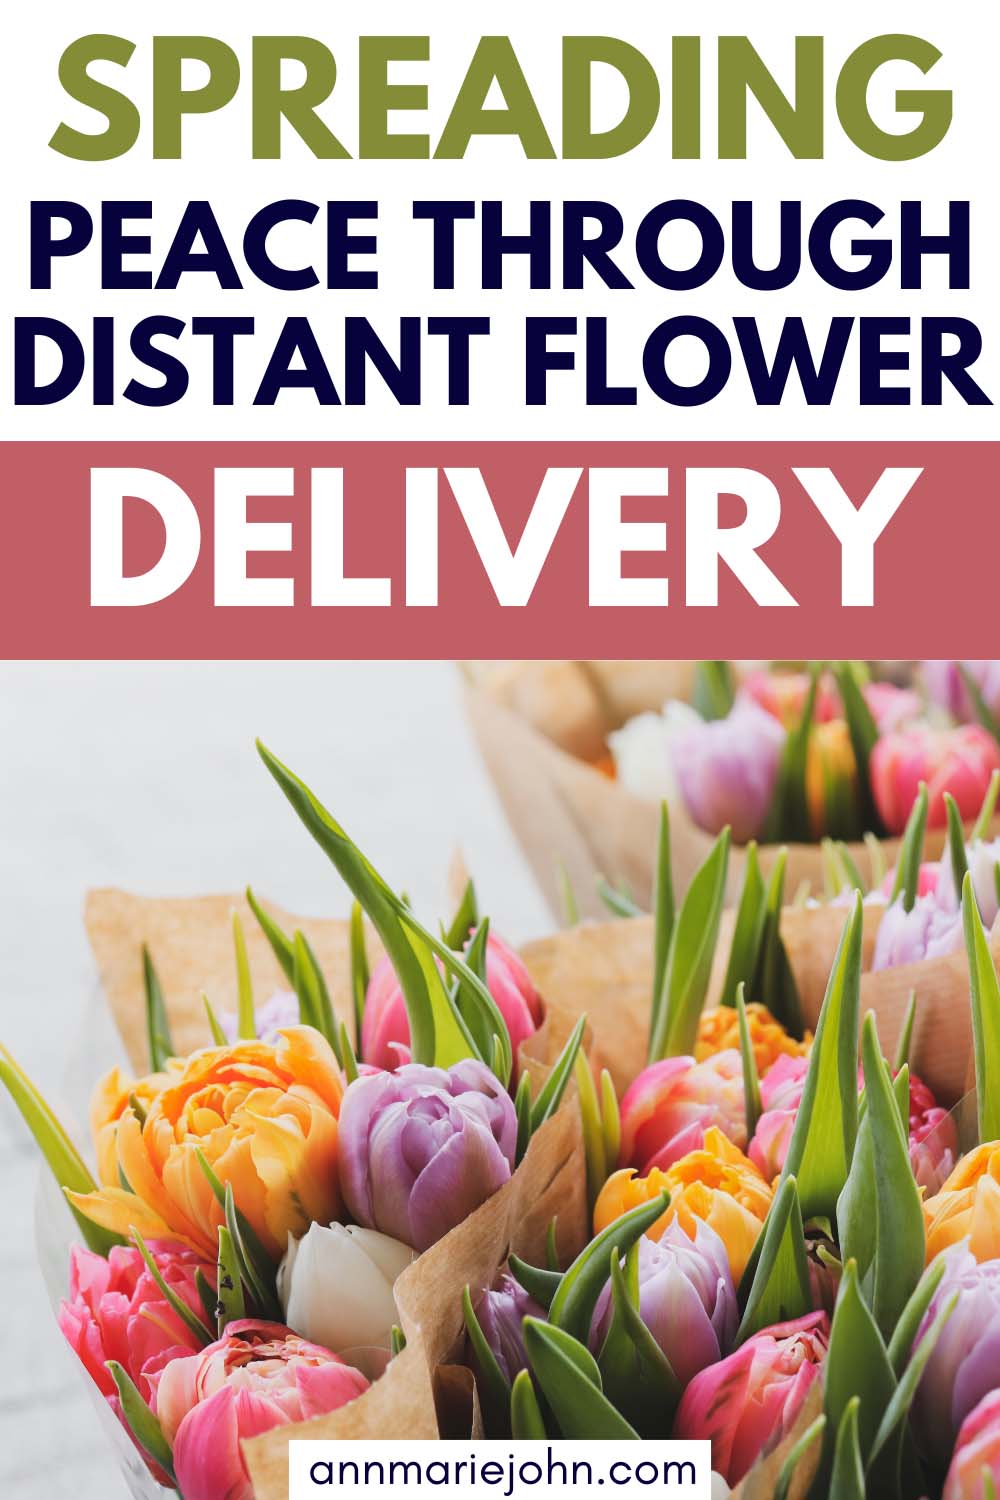 Spreading Peace Through Distant Flower Delivery